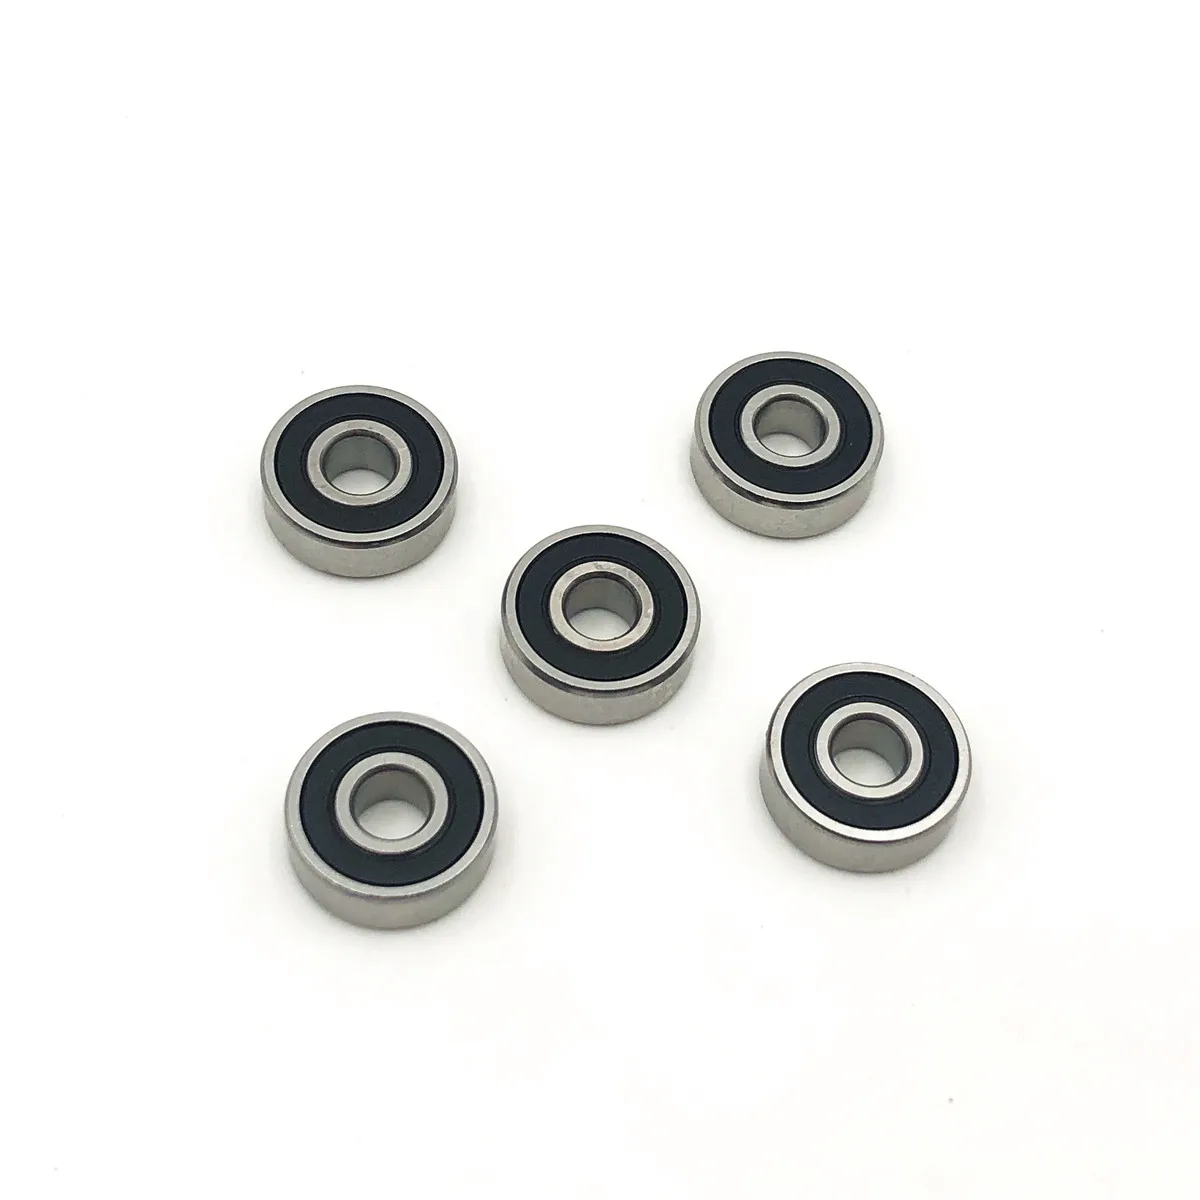 

1pcs Deep Groove Ball Bearing 6003-2RS 6003RS 6003 RS 2RS Rubber Sealed 17x35x10 mm Miniature Bearings